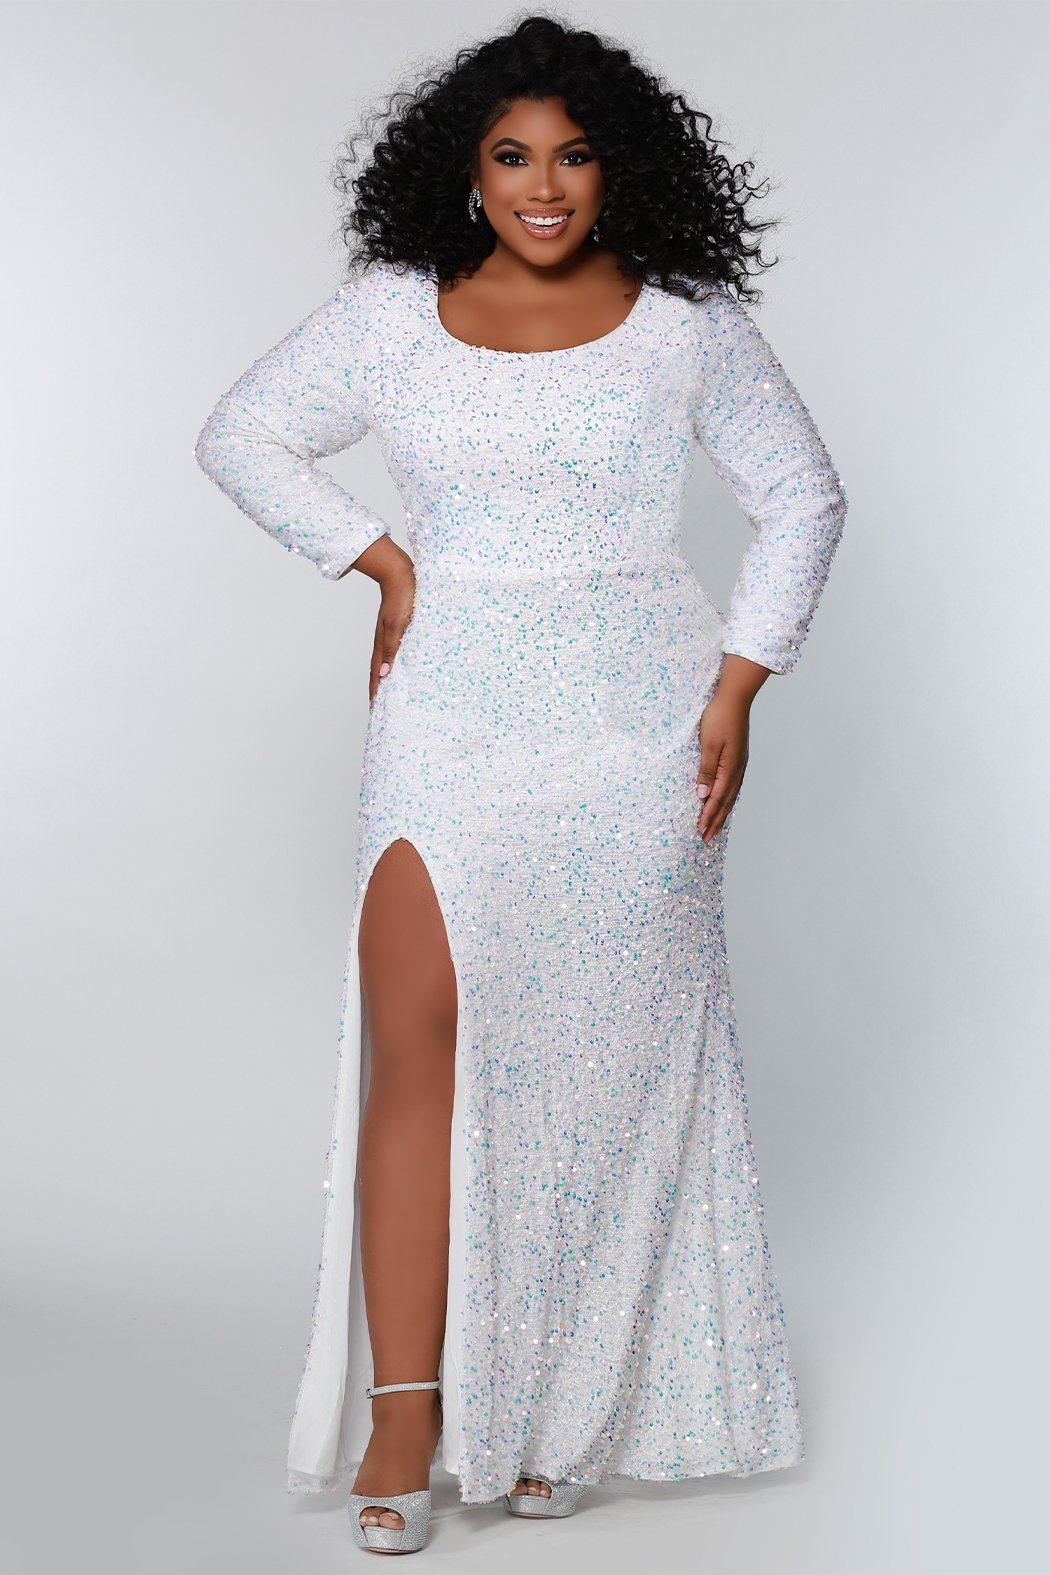 Style SC7320 Sydney's Closet Plus Size 18 Prom Sequined White Side Slit Dress on Queenly